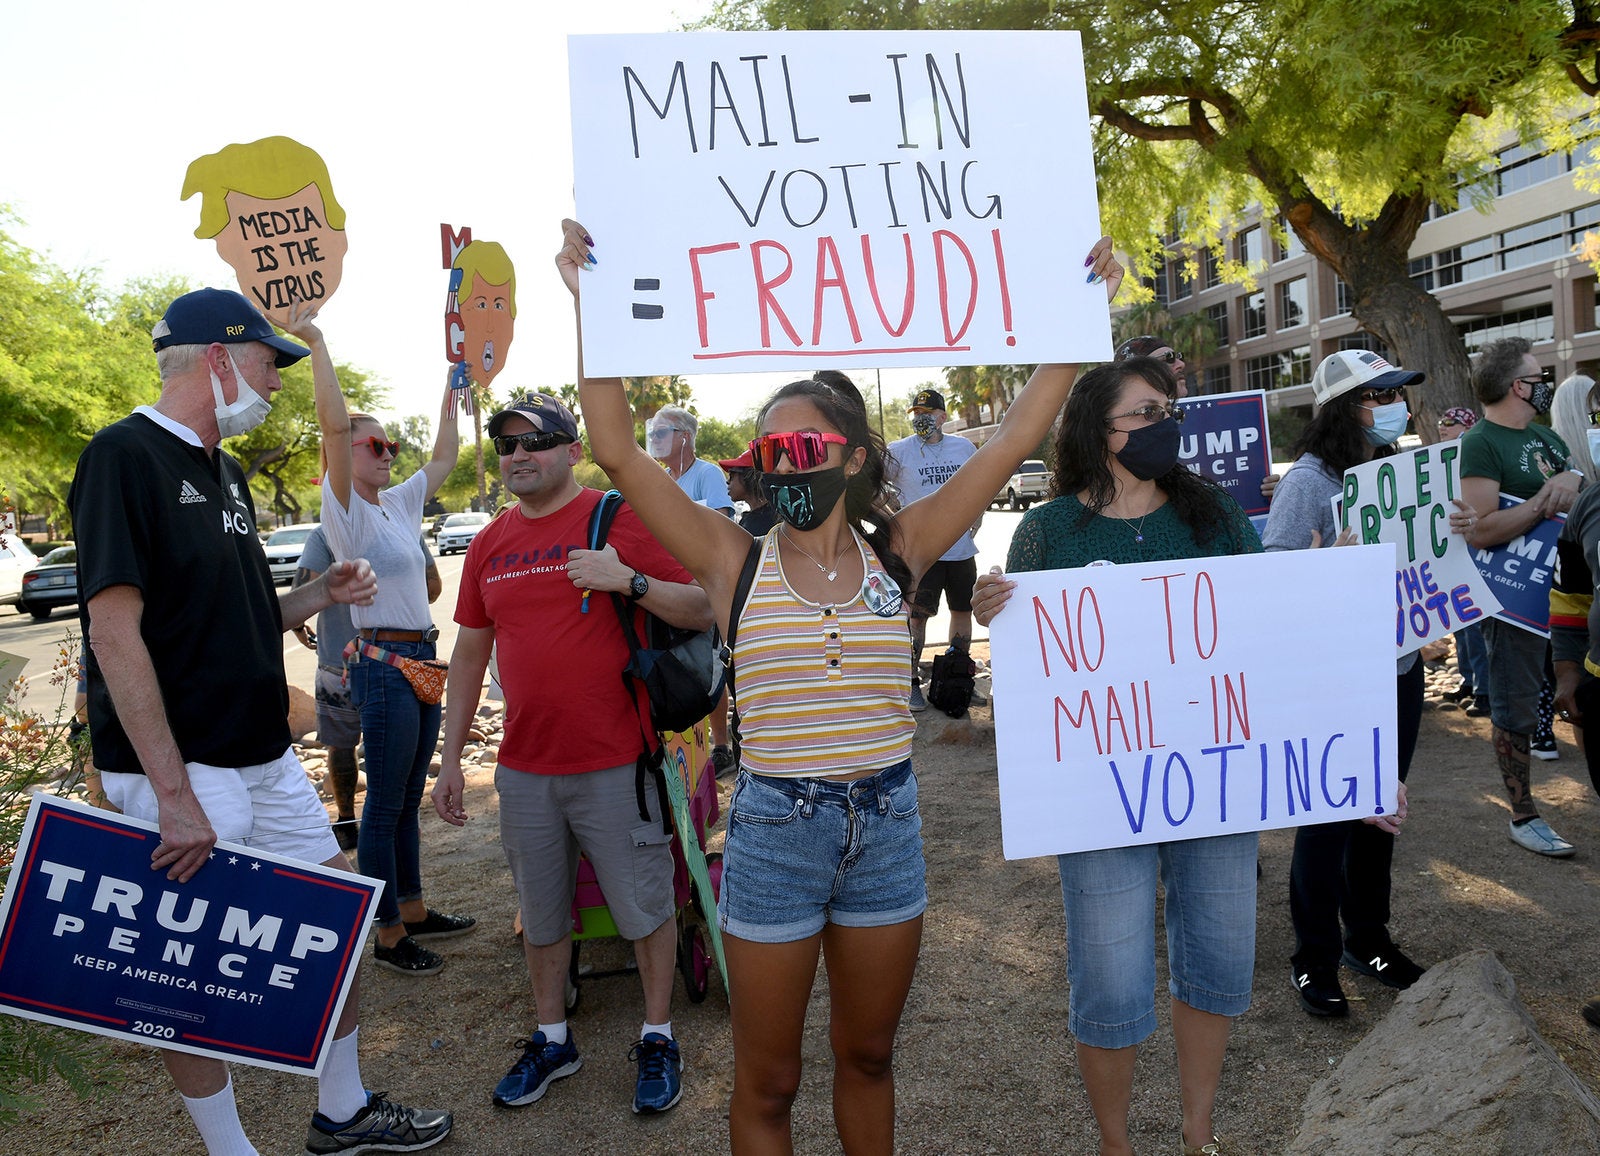 Trump supporters protest against the passage of a mail-in voting bill